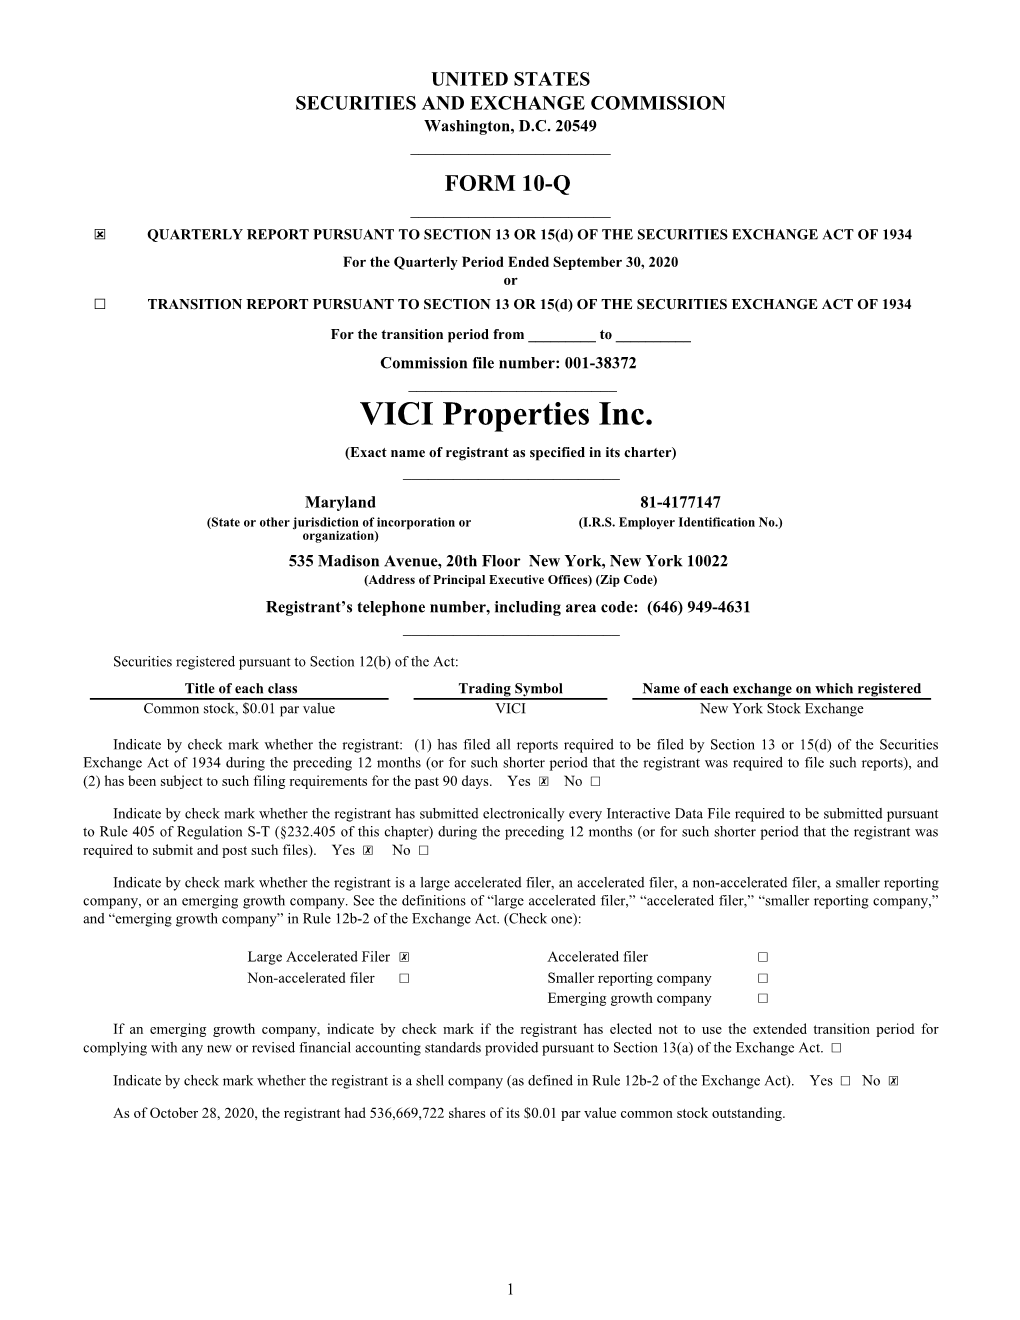 VICI Properties Inc. (Exact Name of Registrant As Specified in Its Charter) ______Maryland 81-4177147 (State Or Other Jurisdiction of Incorporation Or (I.R.S